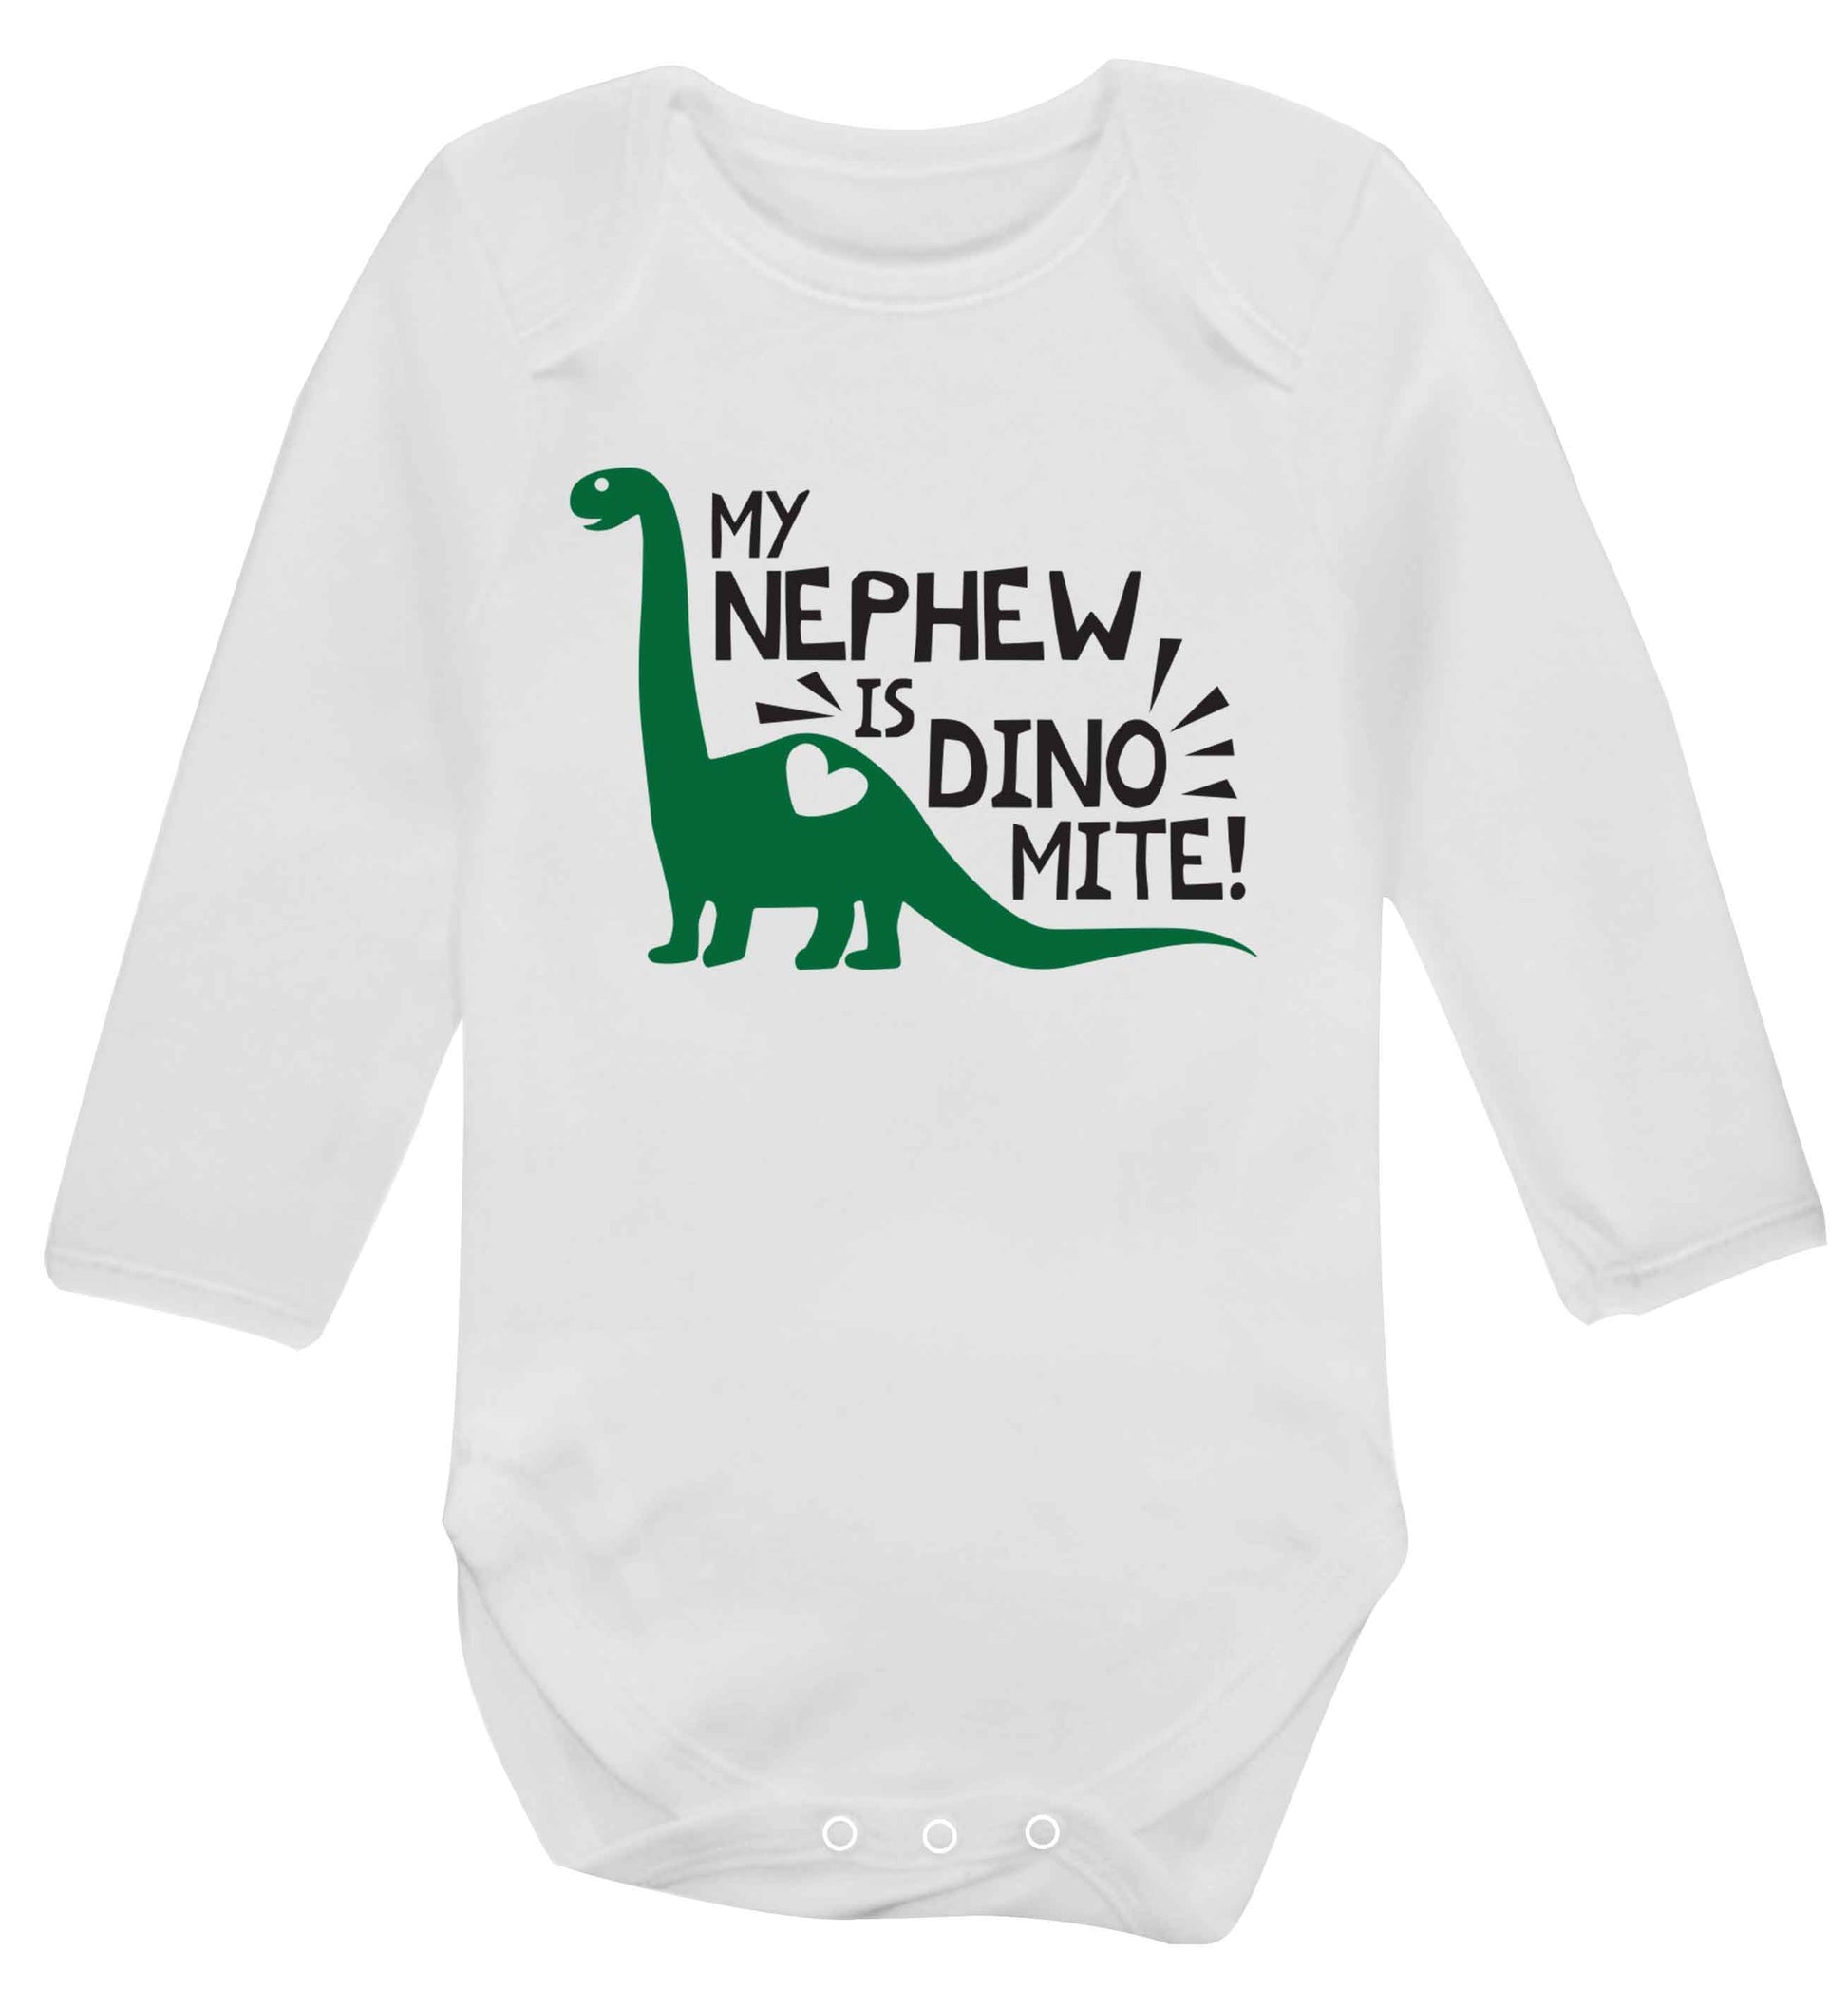 My nephew is dinomite! Baby Vest long sleeved white 6-12 months